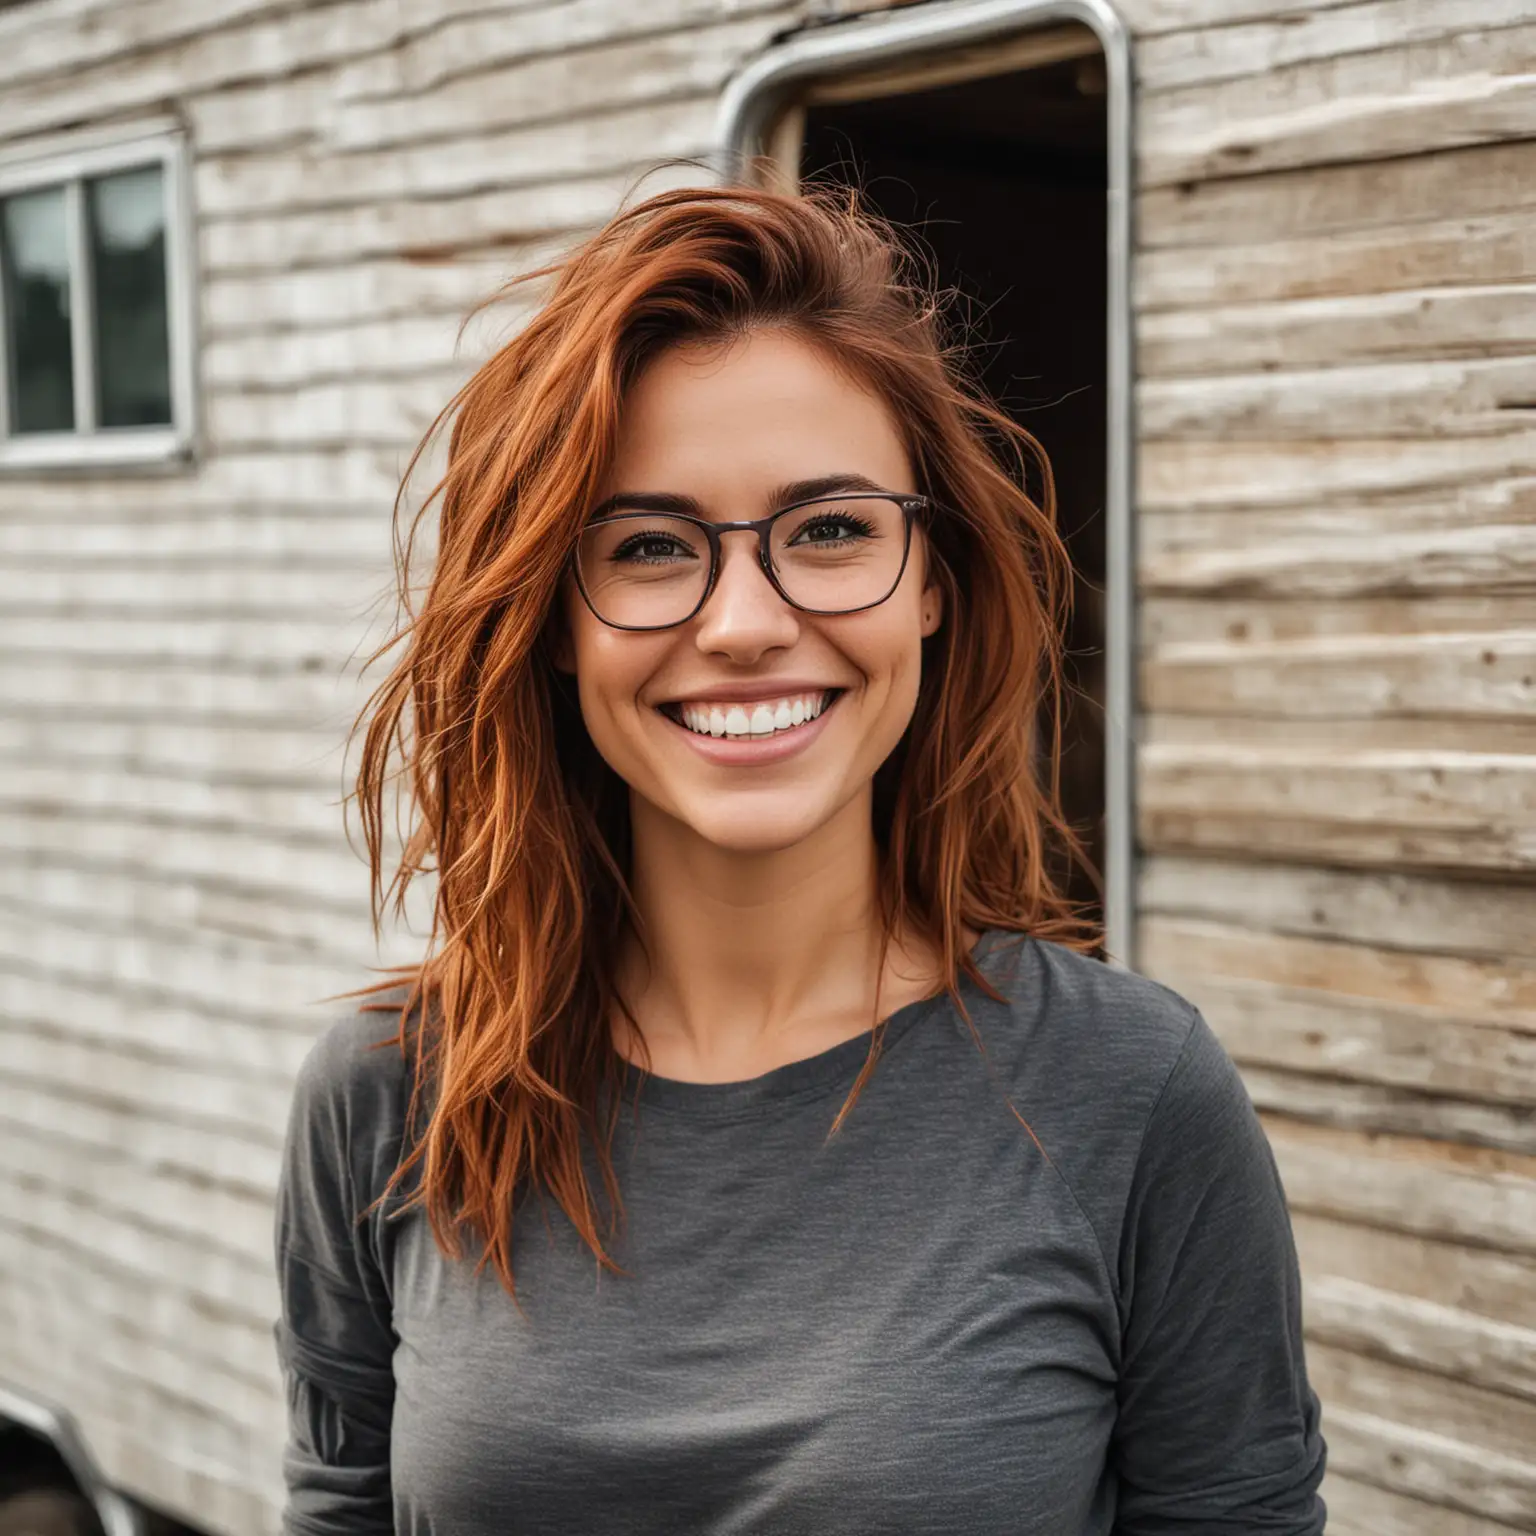 realistic 28 year old 5' 6" 127 pounds fit, beautiful woman with white teeth, glasses, tilted head, auburn messy hair and gorgeous smile standing in front of a trailer home